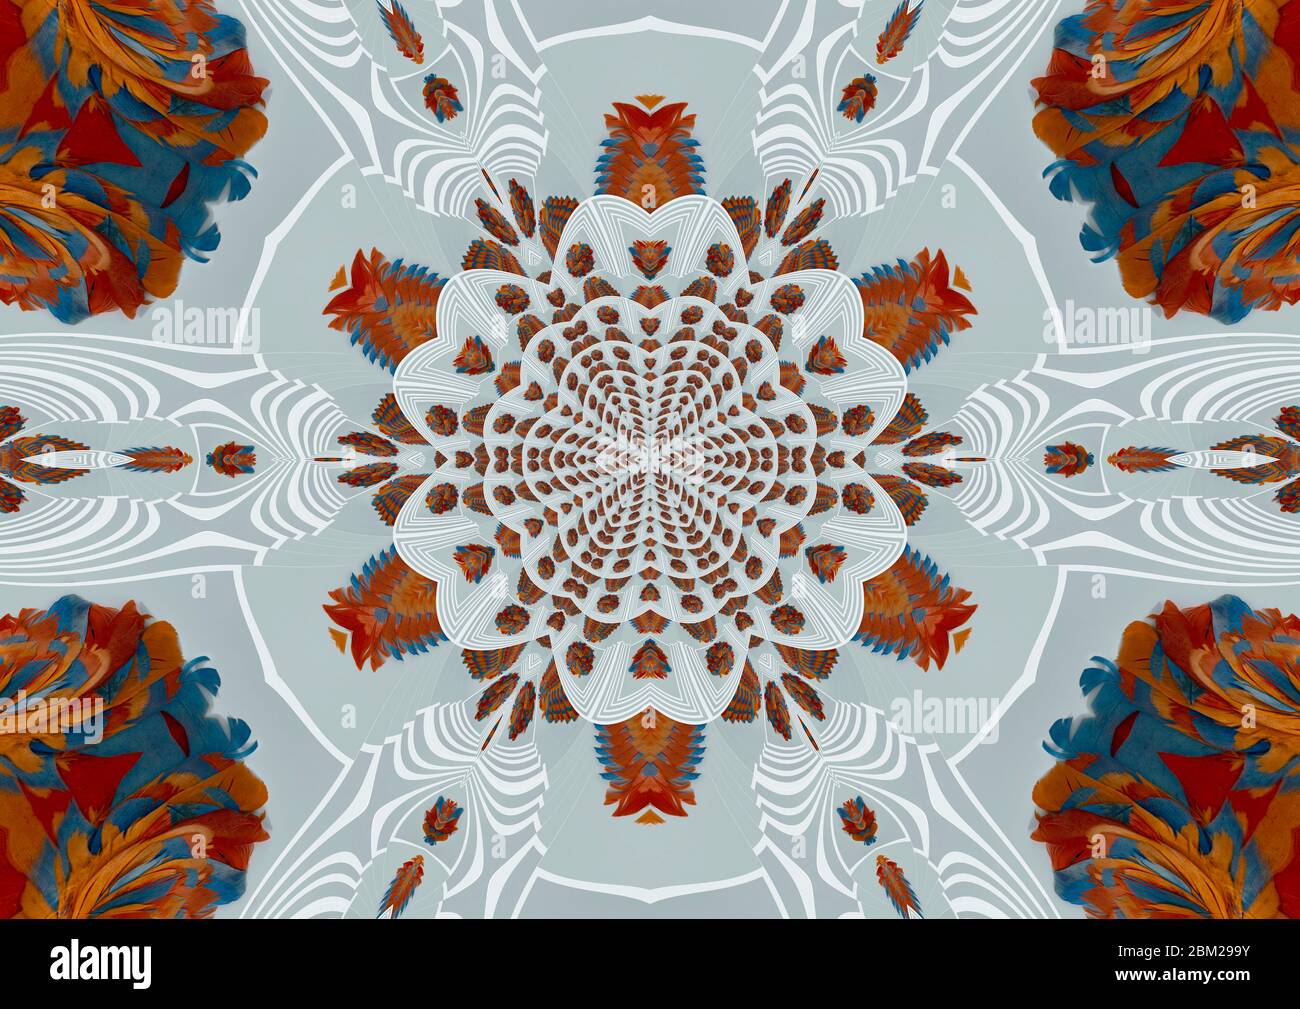 These striking mandalas were inspired by a work in the Rijksmuseum in Amsterdam called a Cockade of feathers in the colours orange and blue. Stock Photo